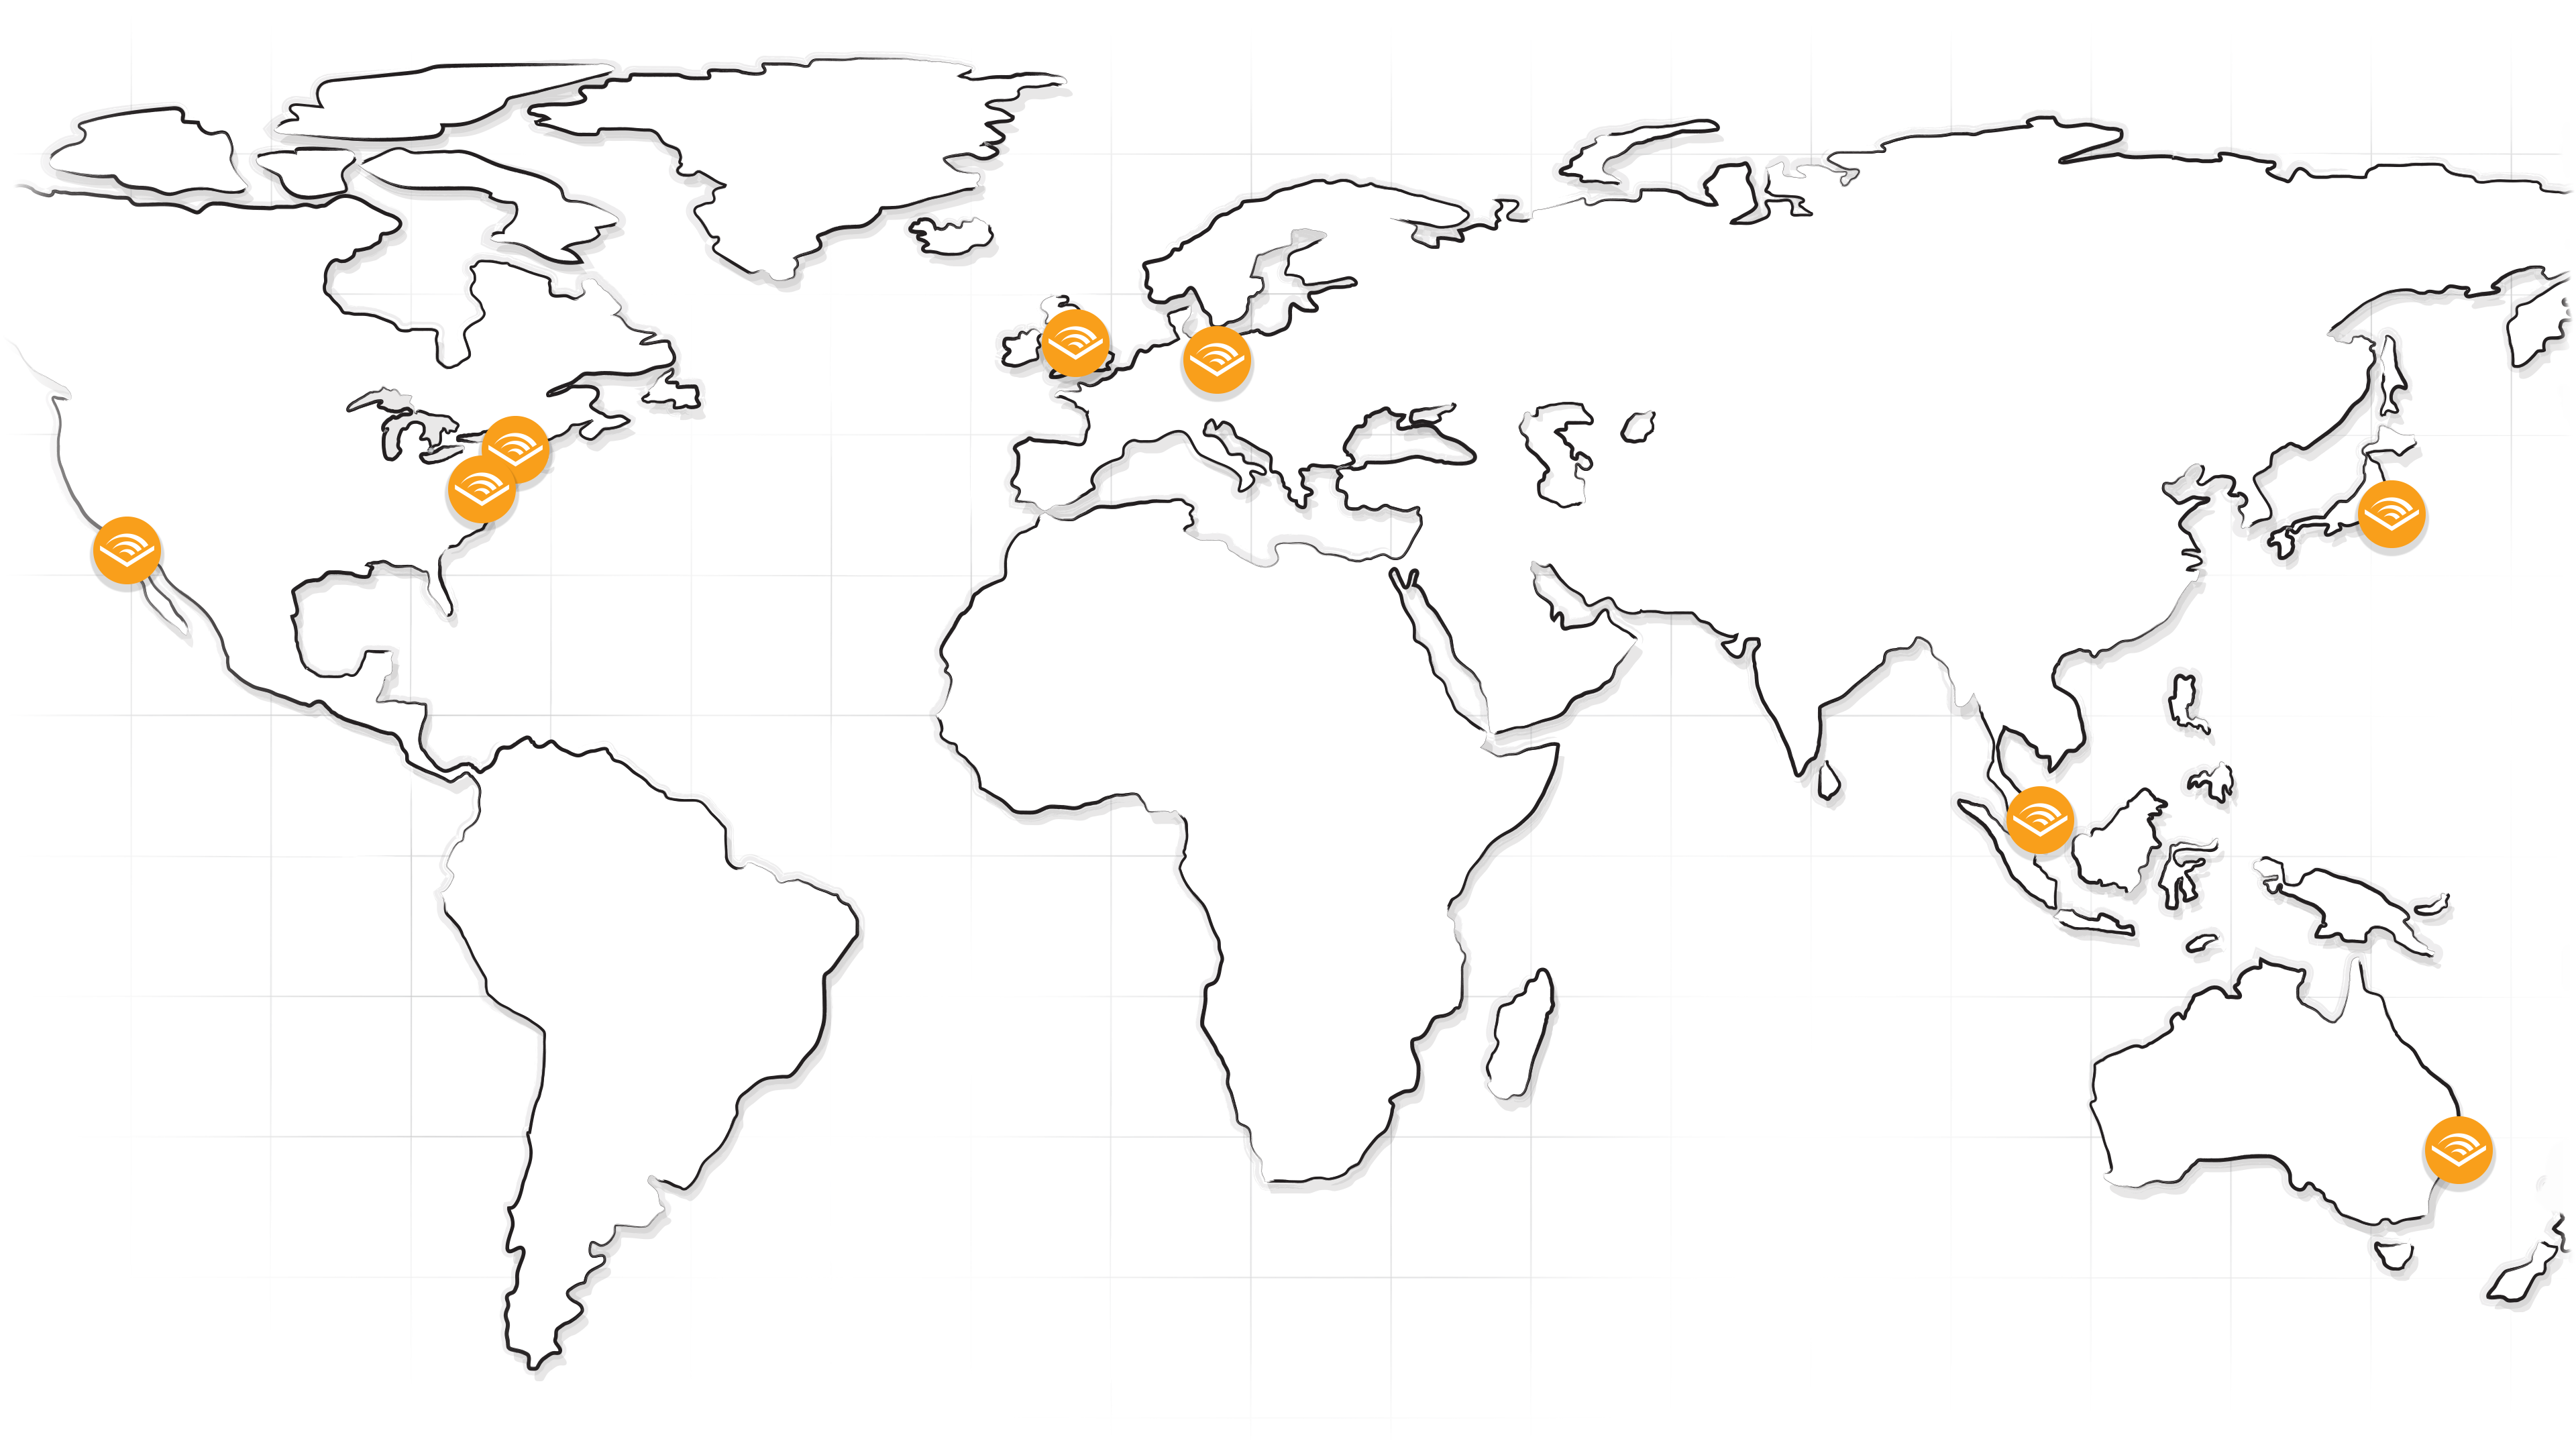 Picture of a map showing the locations of Audible's offices around the world.